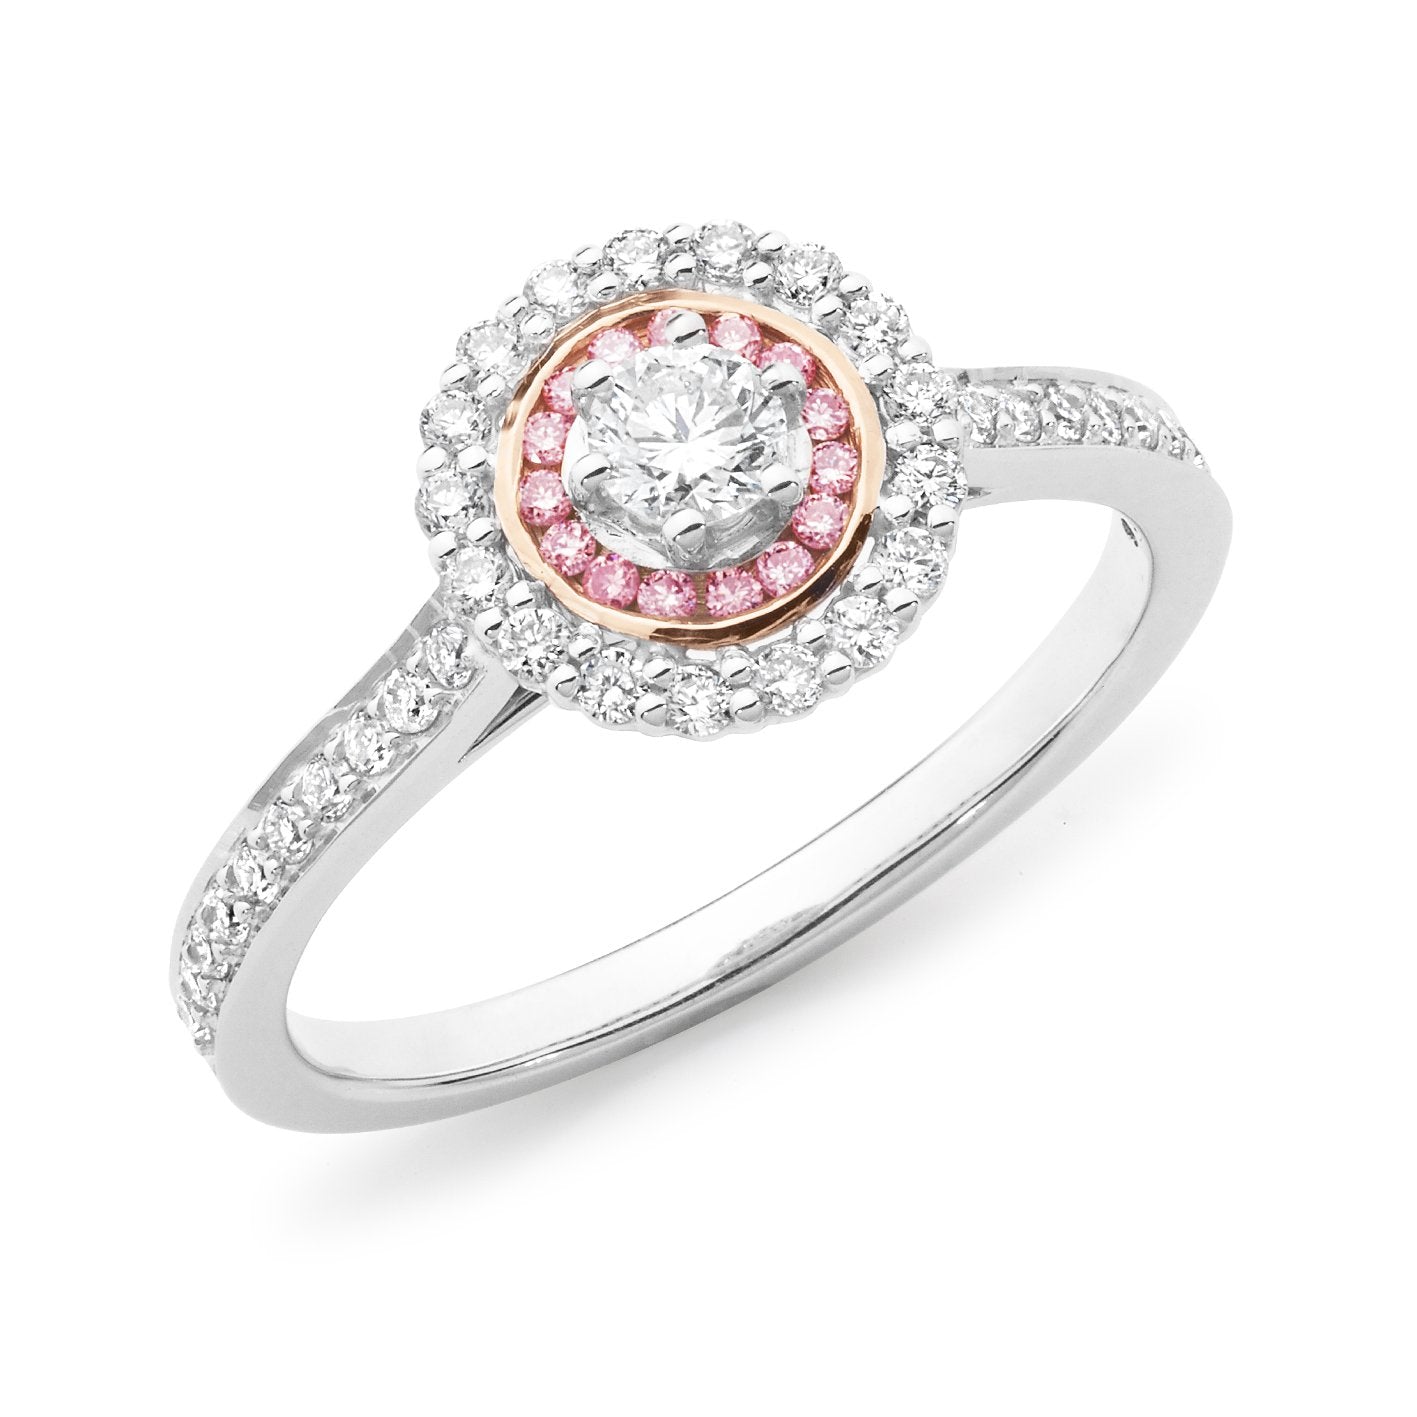 PINK CAVIAR 0.48ct Pink Diamond Round Brilliant Cut Halo Engagement Ring in 18ct White Gold